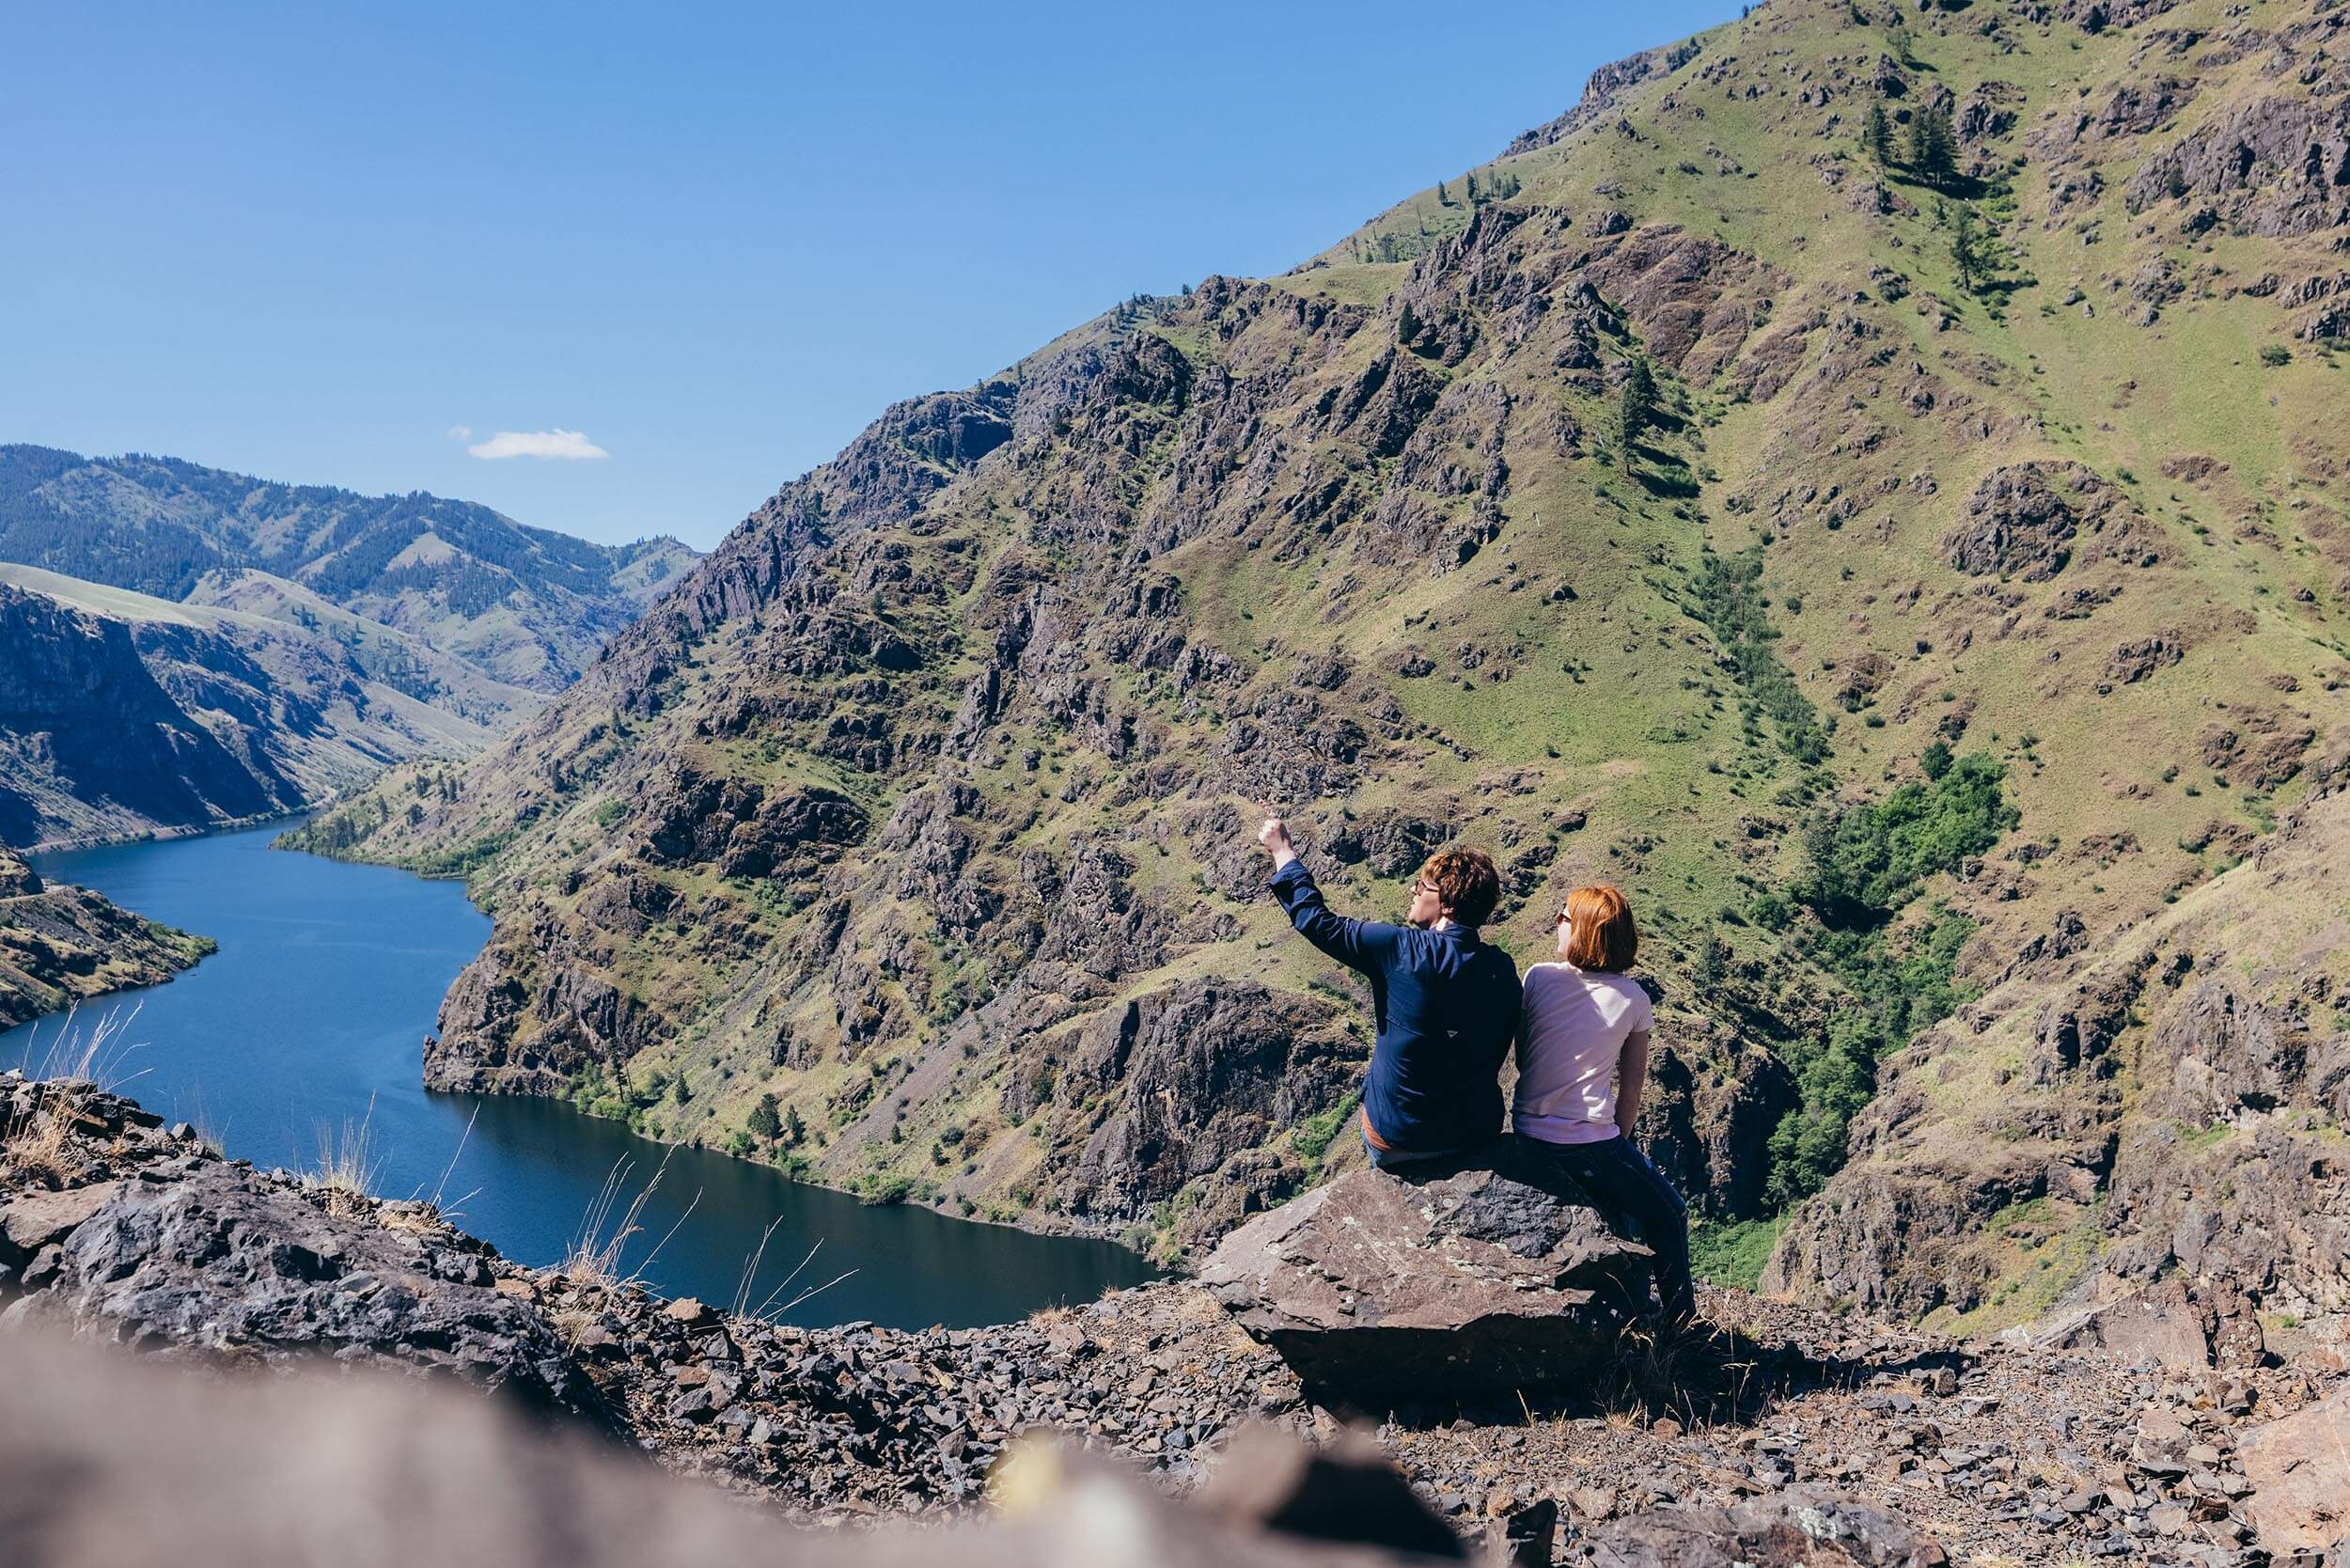 two people sitting on a rock looking out over a river running through a canyon